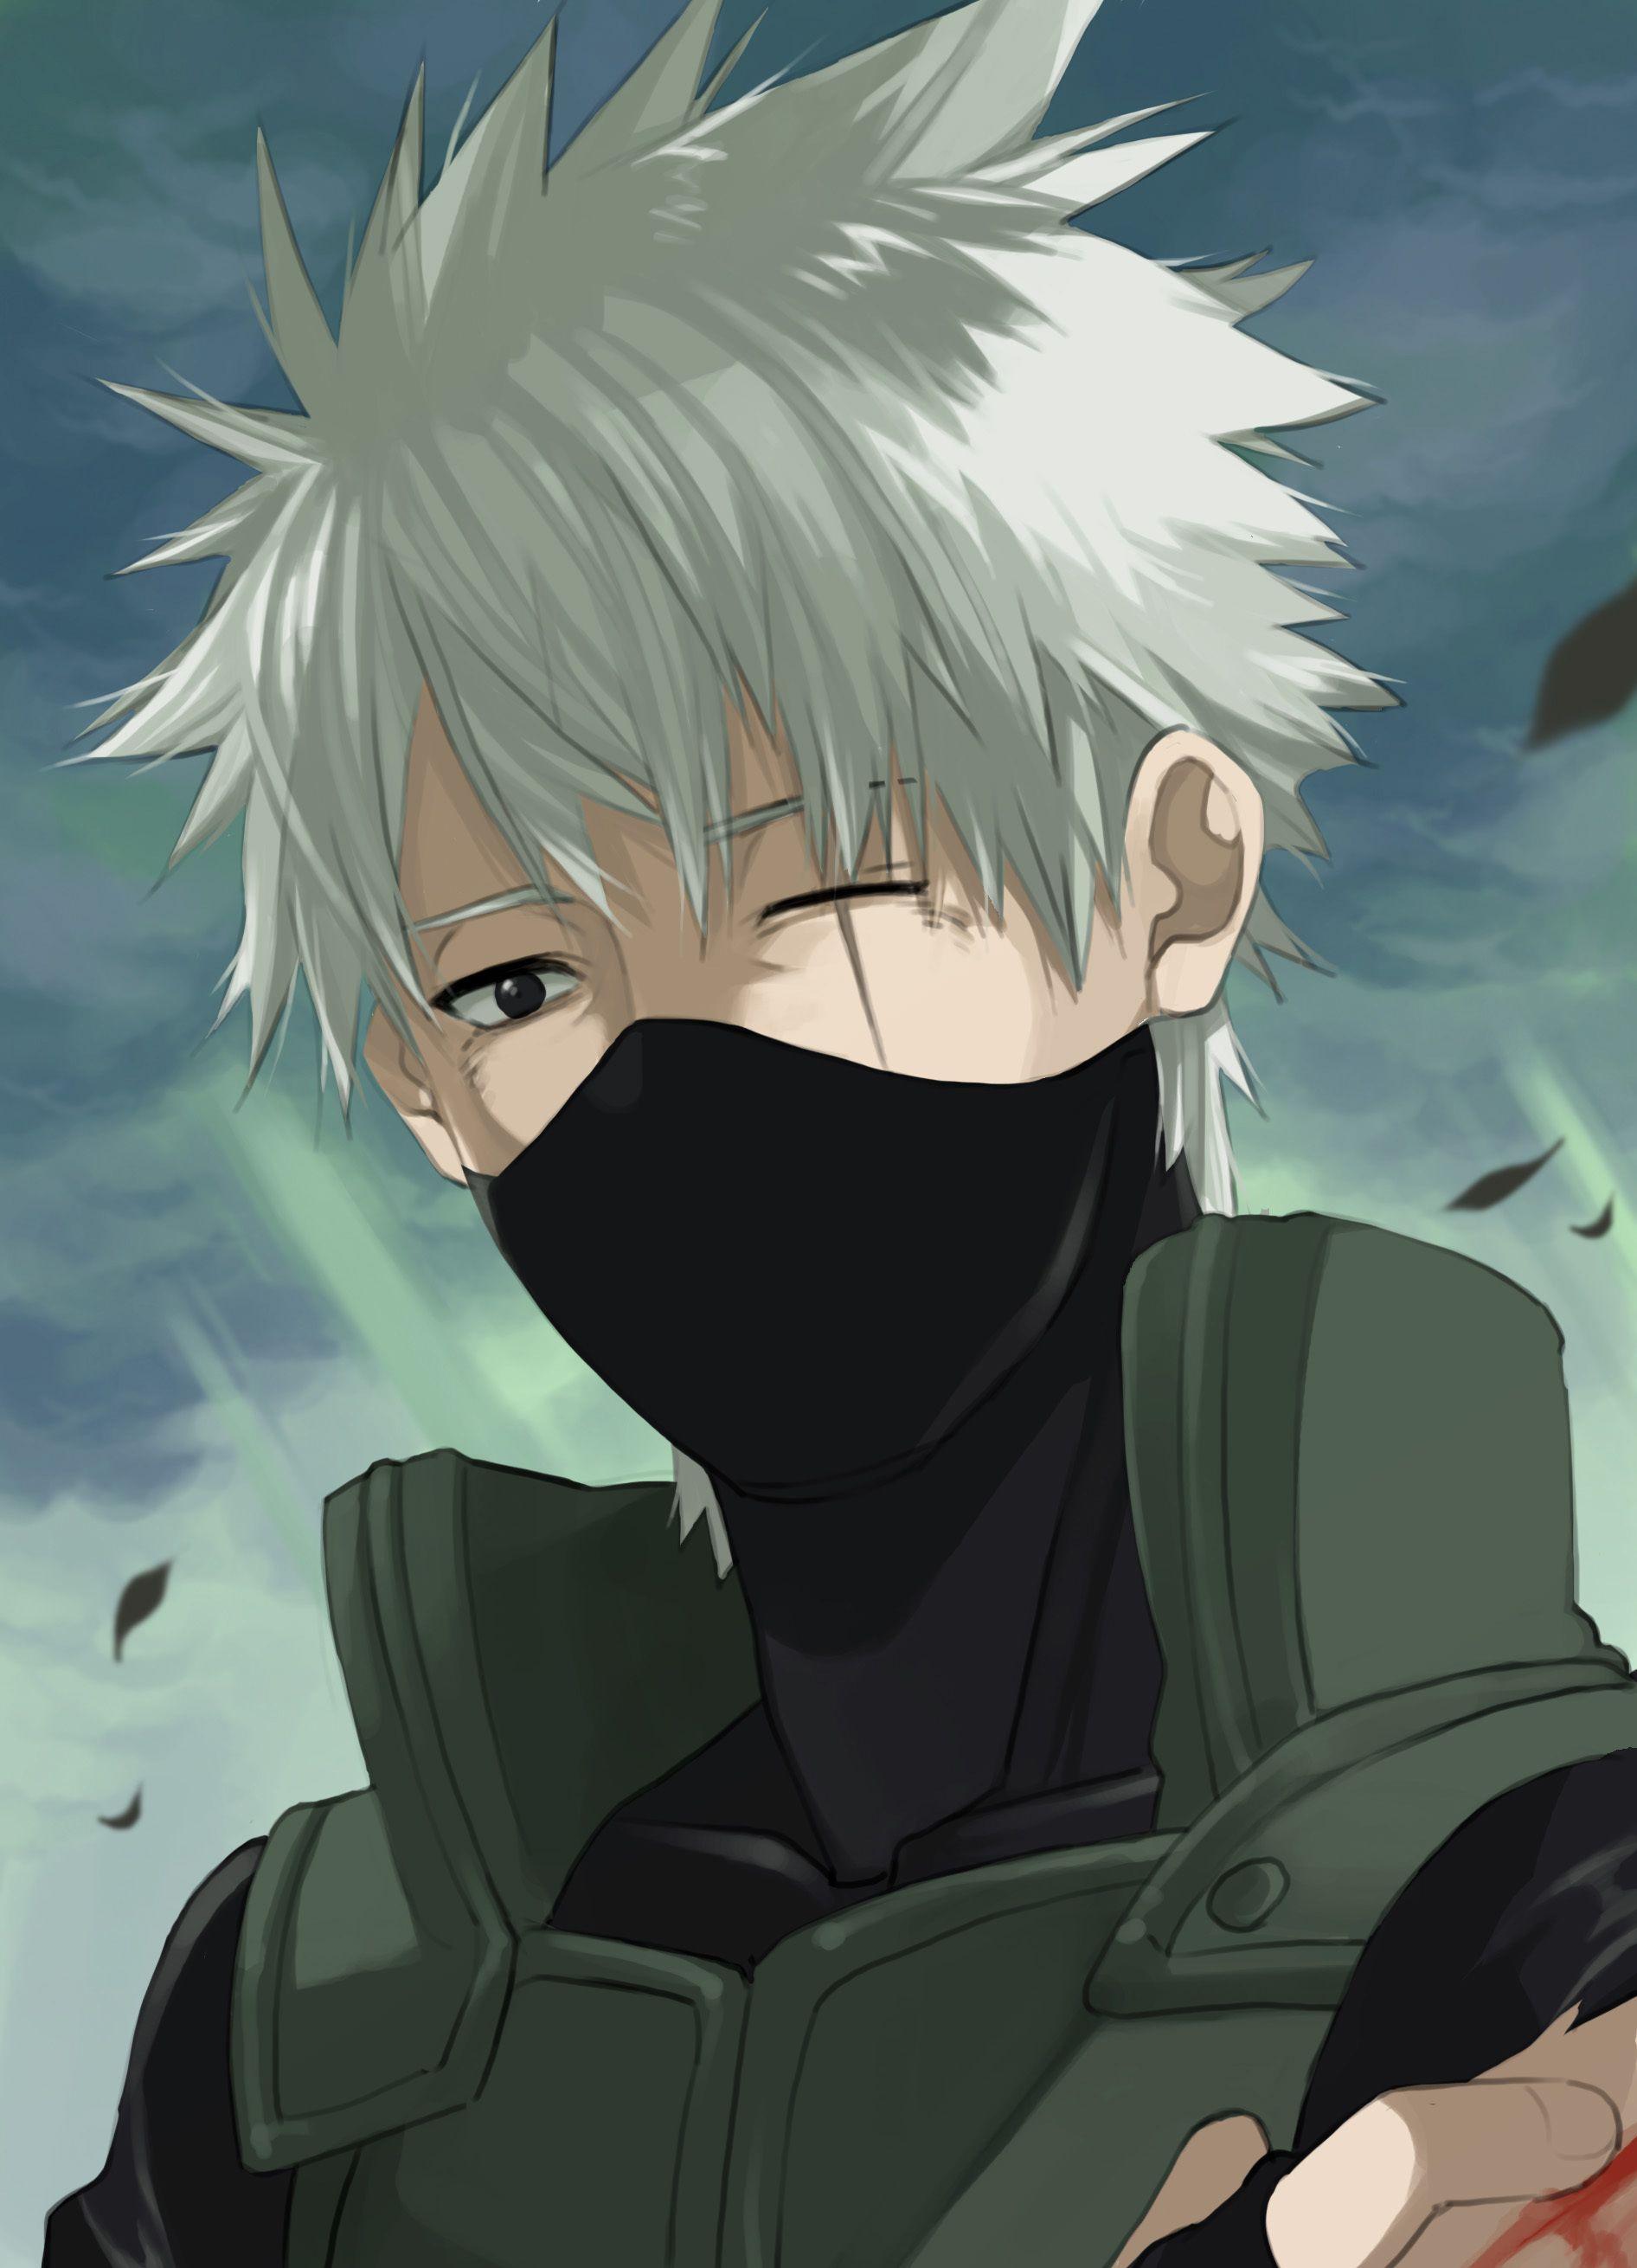 Kakashi Wallpaper HD Free Full HD Download, use for mobile and desktop.  Discover more Anime, Cha…